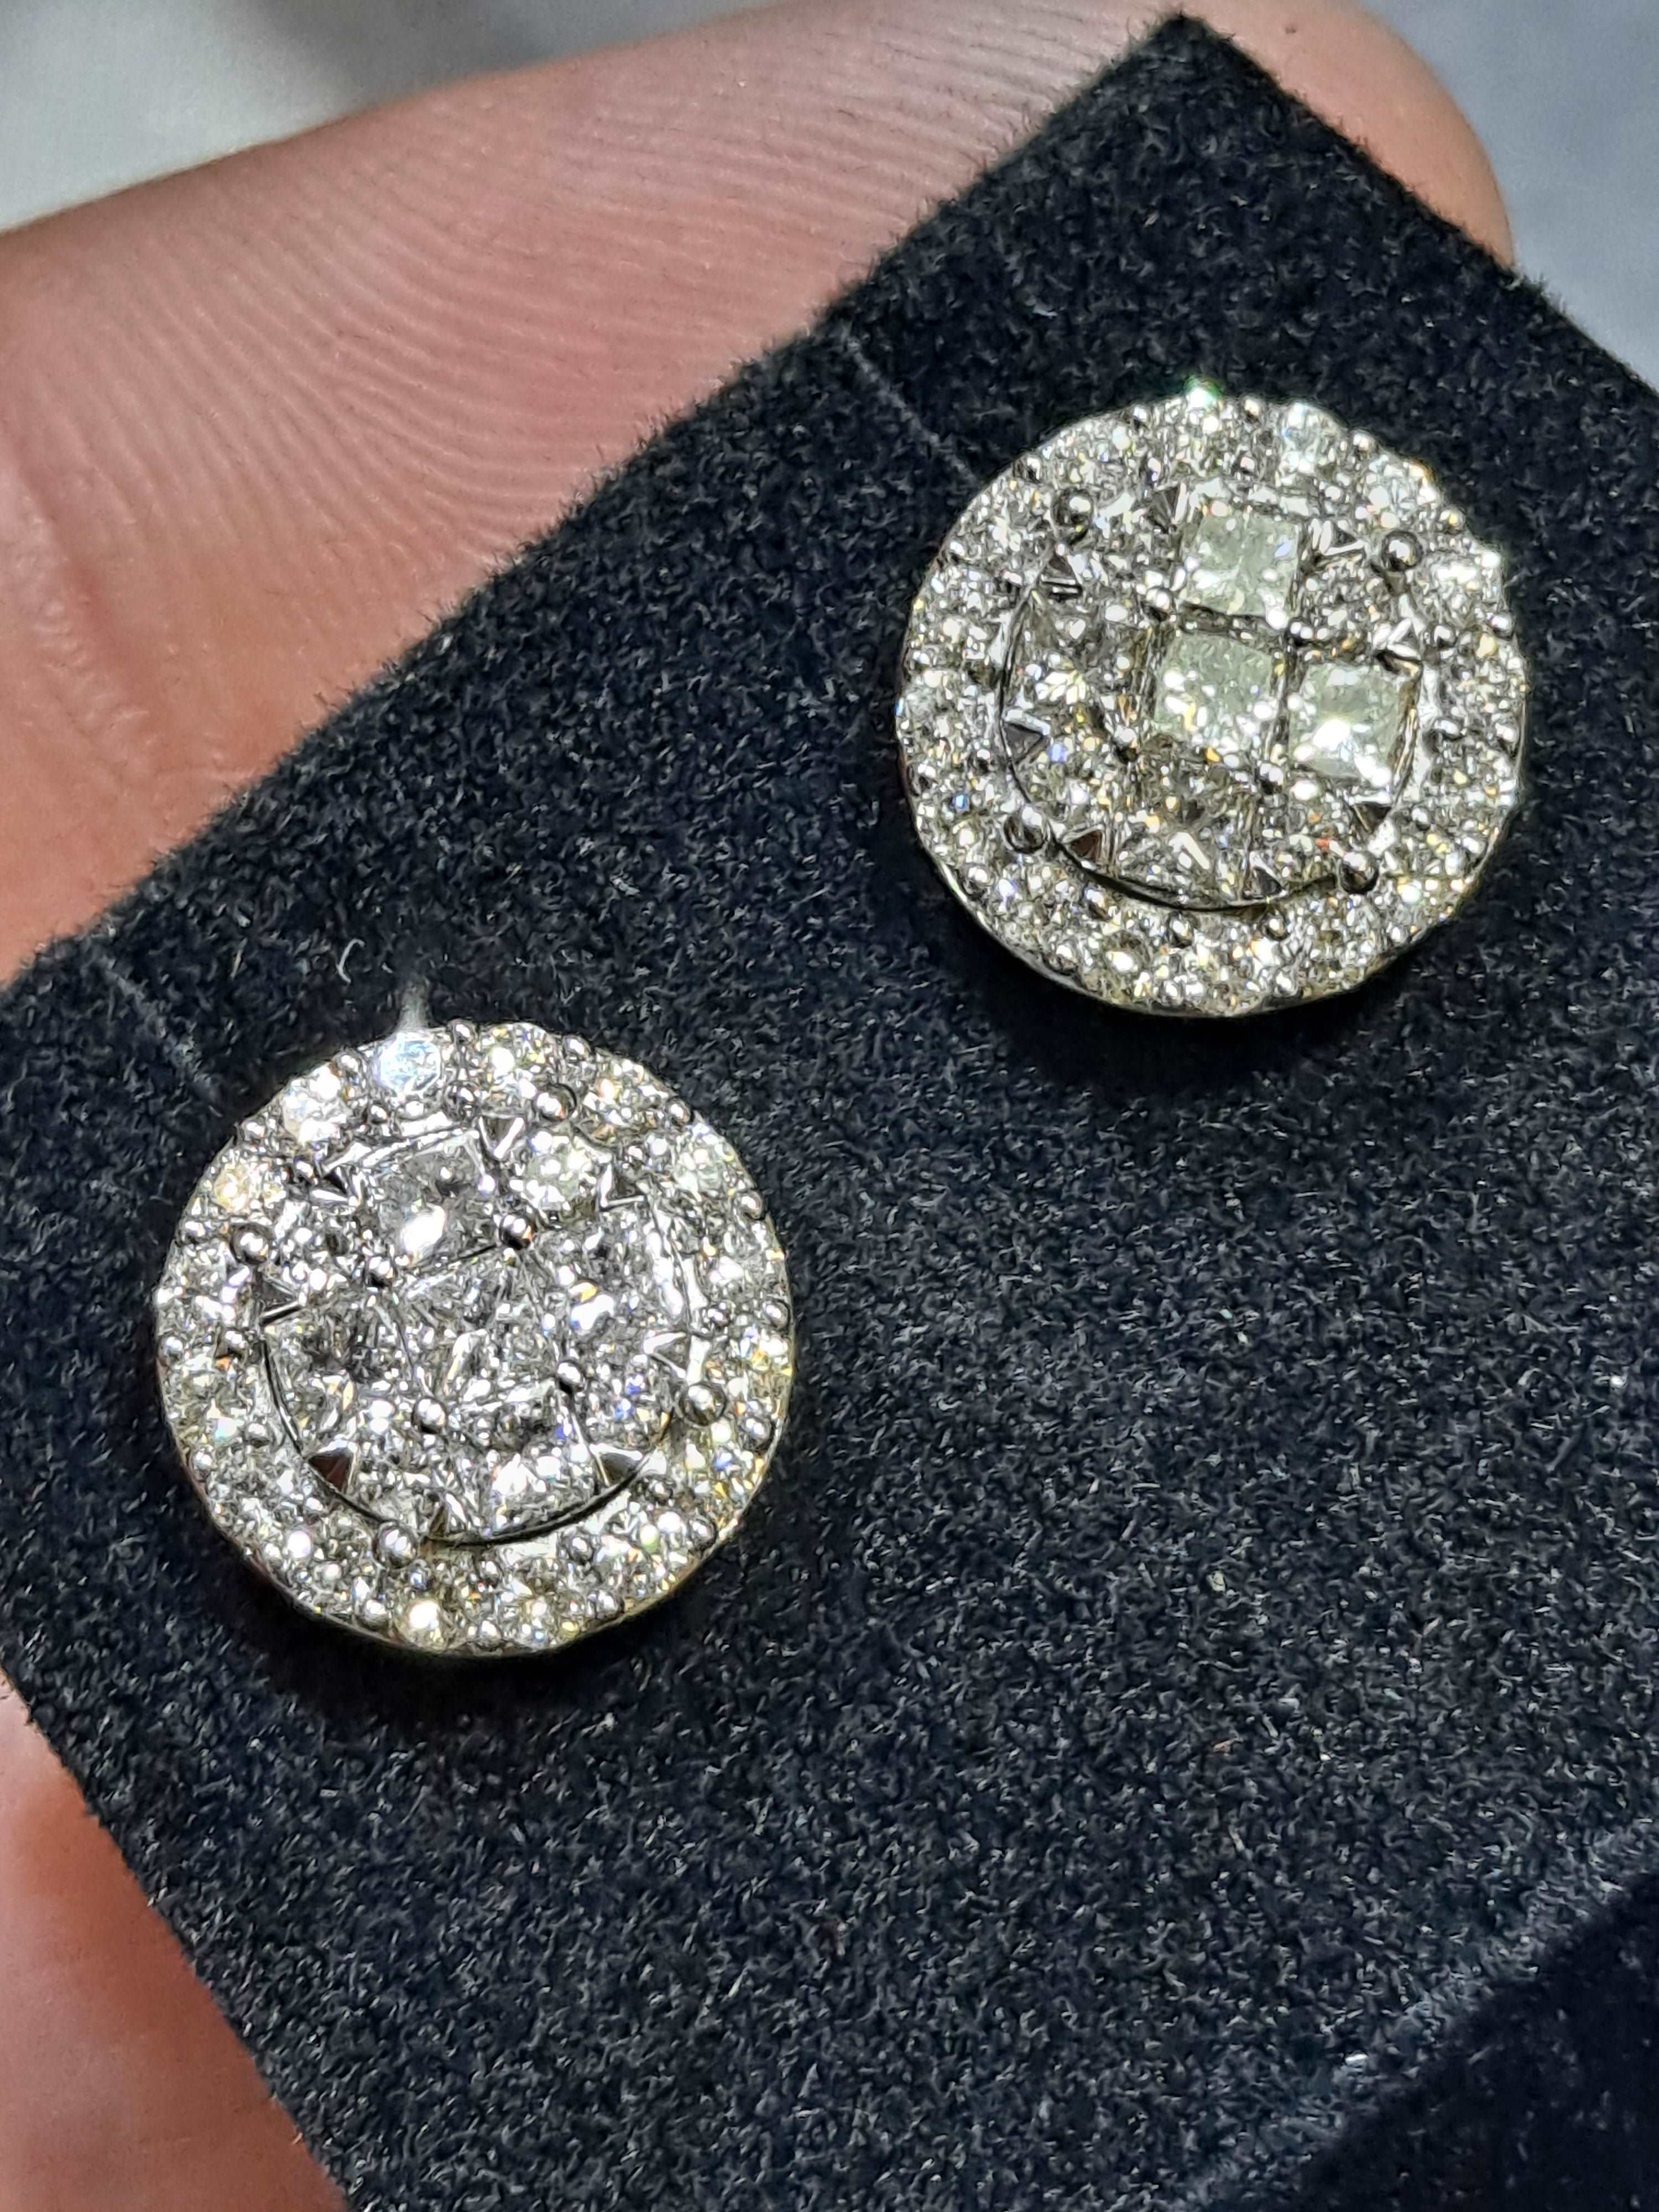 12mm 14k white gold "large" 2 .25 cts natural diamond clusters vs-1 earrings